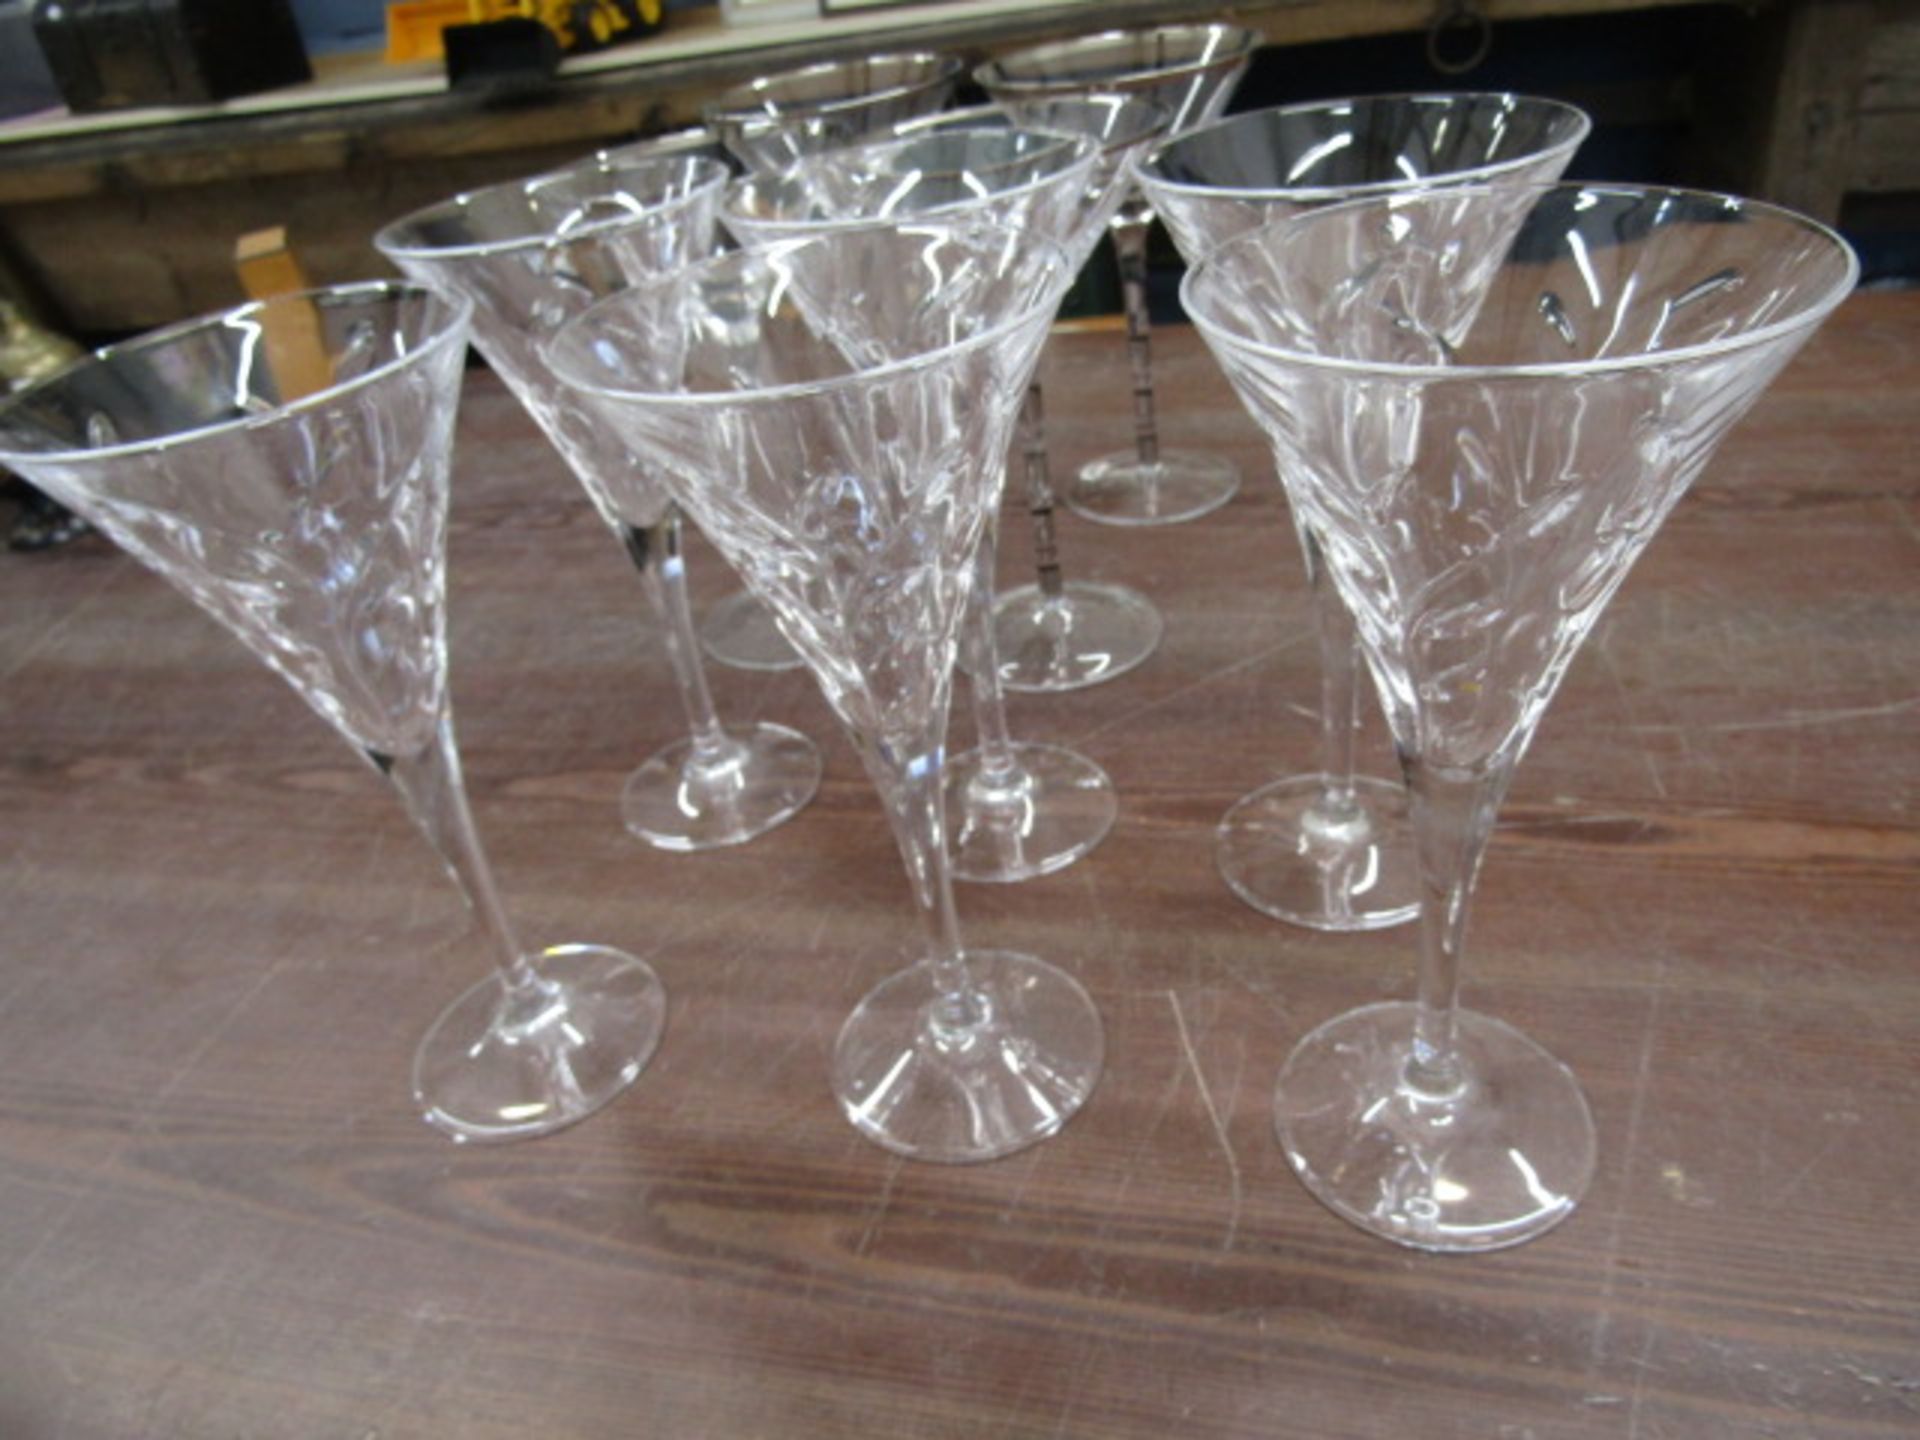 Wine glasses, cocktail, Babycham, cut glass- various glass ware, most good quality - Image 3 of 6